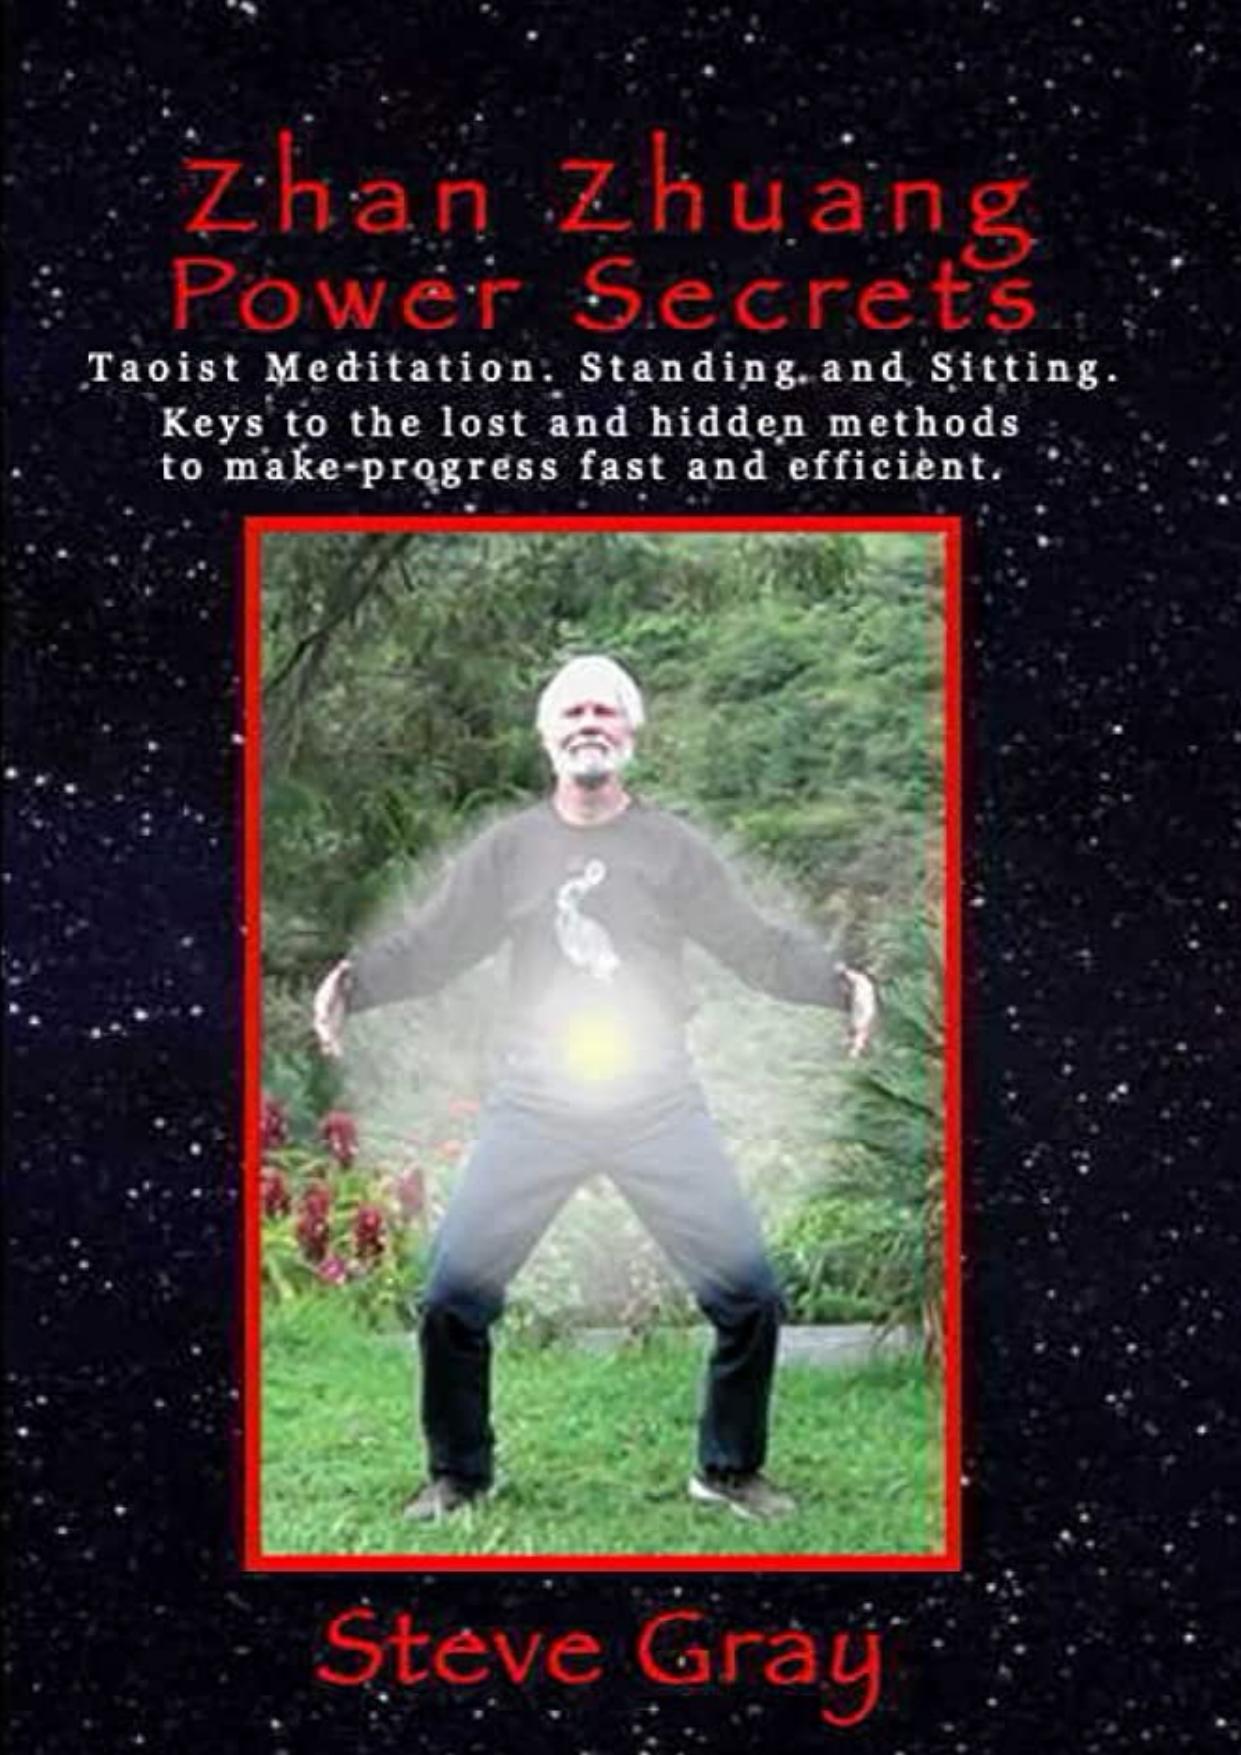 Zhan Zhuang Power Secrets: Taoist Meditation. Standing & Sitting. Keys to the lost and hidden methods to make progress fast and efficient. by Steve Gray